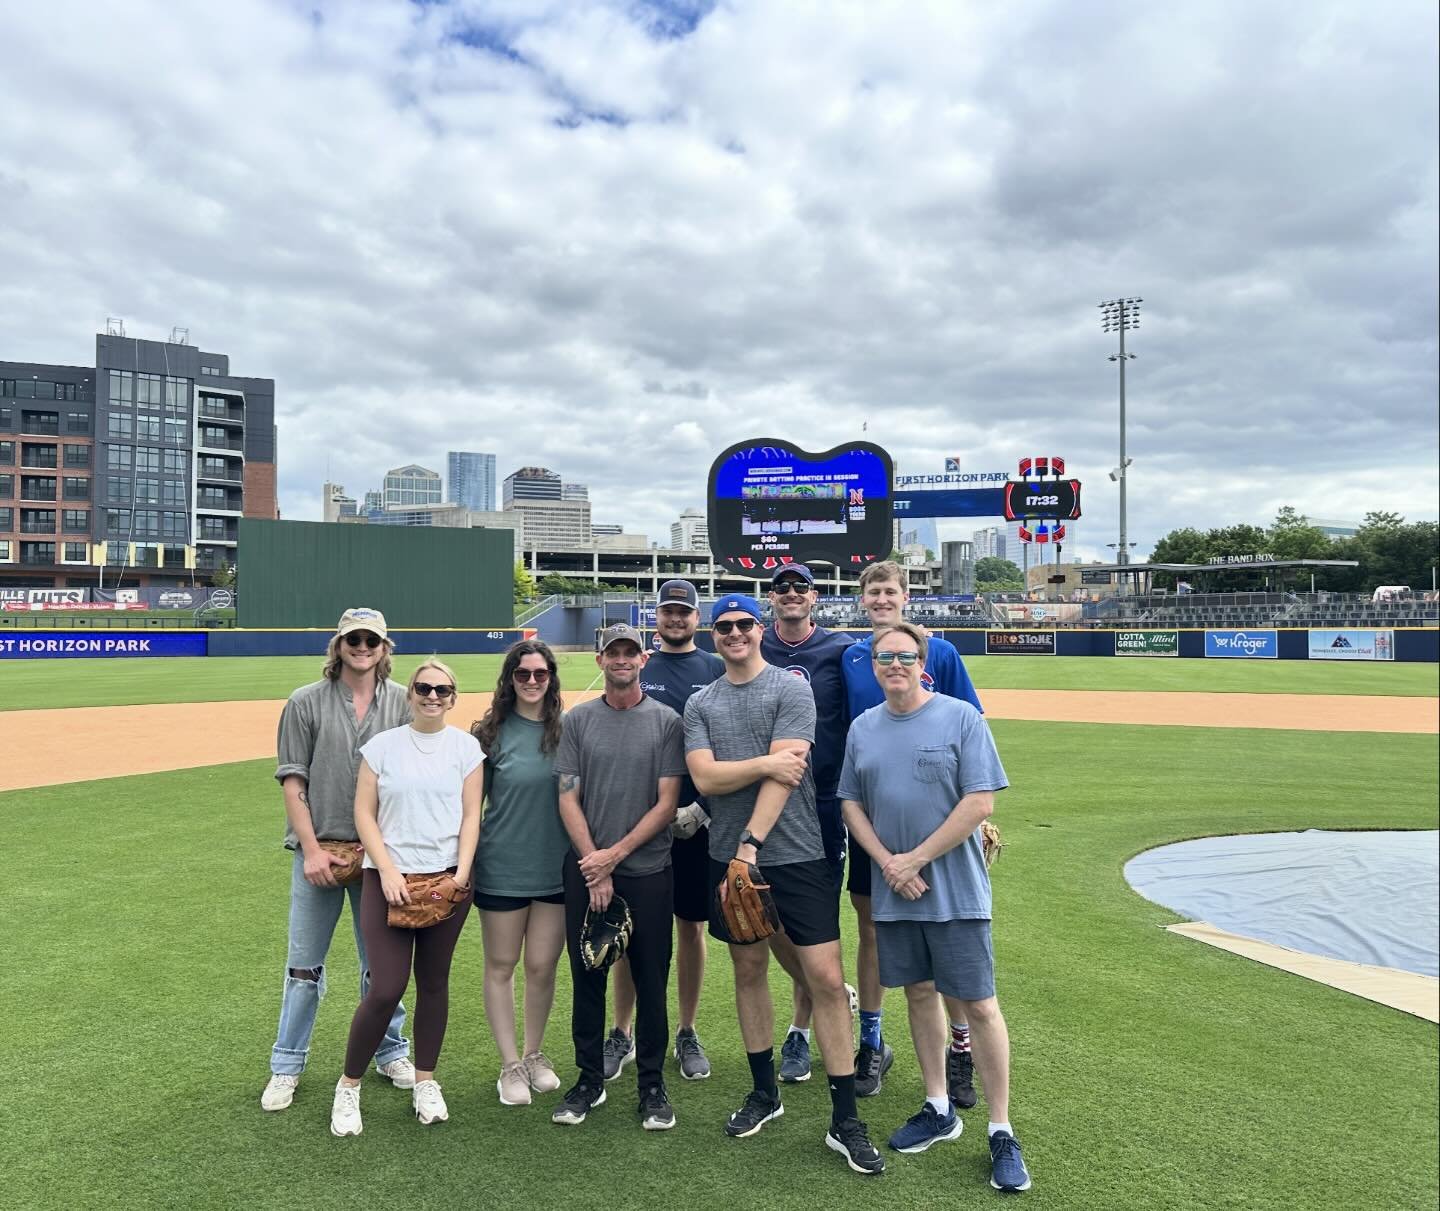 Another perfect day of batting practice at @firsthorizonprk for our third annual team building with @nashvillesounds ⚾️💥